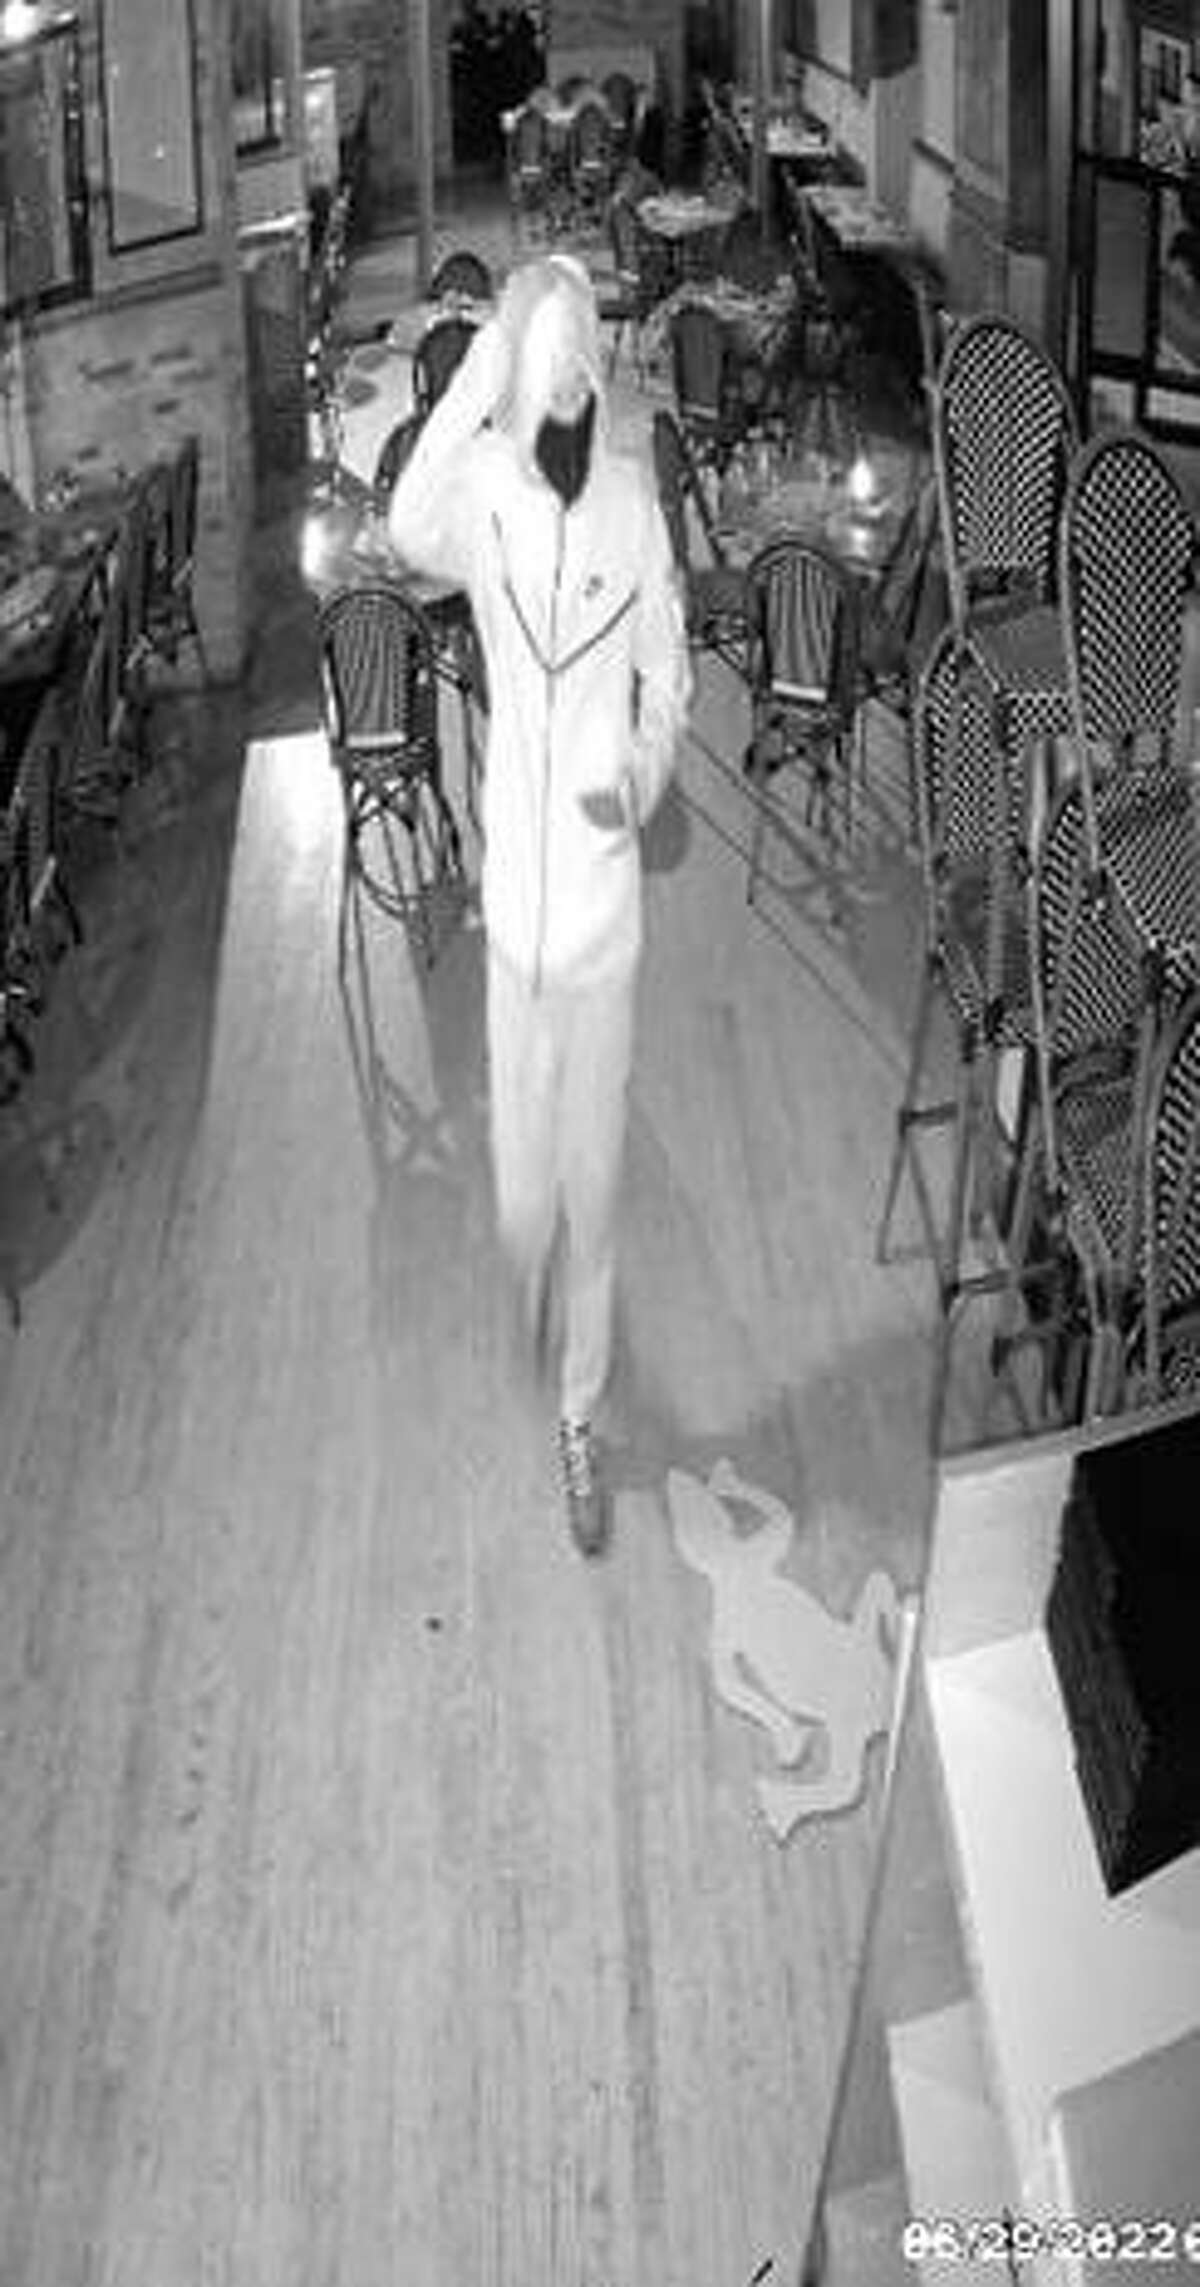 Stamford police are asking the public for help identifying this man, who they say broke in to three local restaurants.